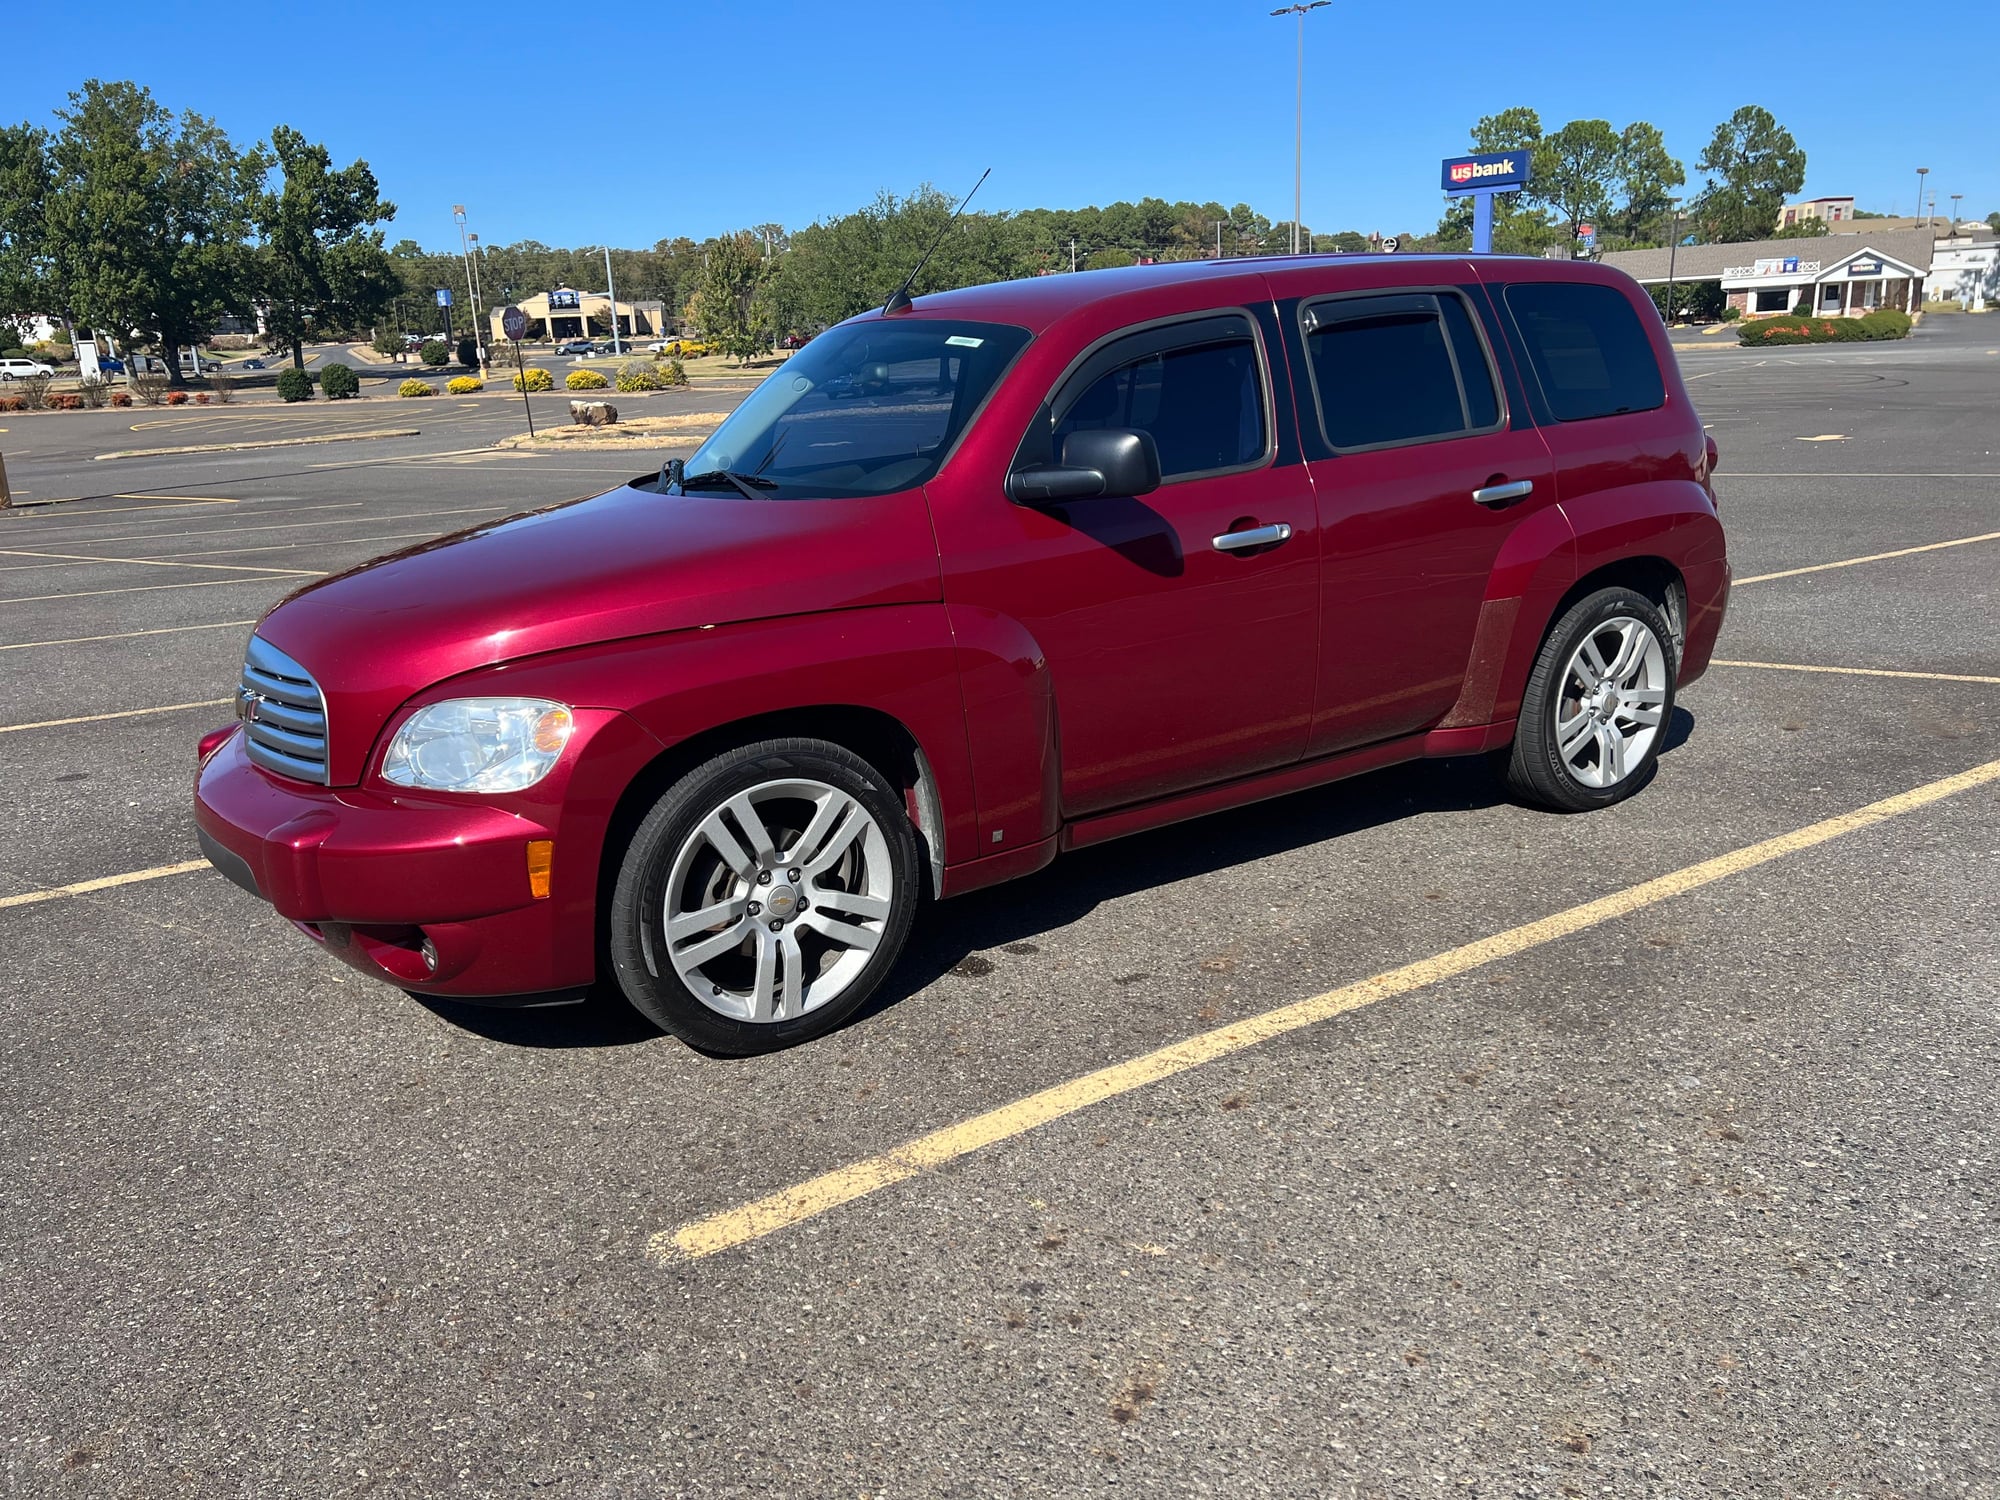 2007 Chevrolet HHR - 2007 HHR LS, low miles, new tires with SS wheels - Used - VIN 3gnda13d47s617348 - 56,000 Miles - 4 cyl - 2WD - Automatic - Wagon - Red - Hot Springs, AR 71913, United States